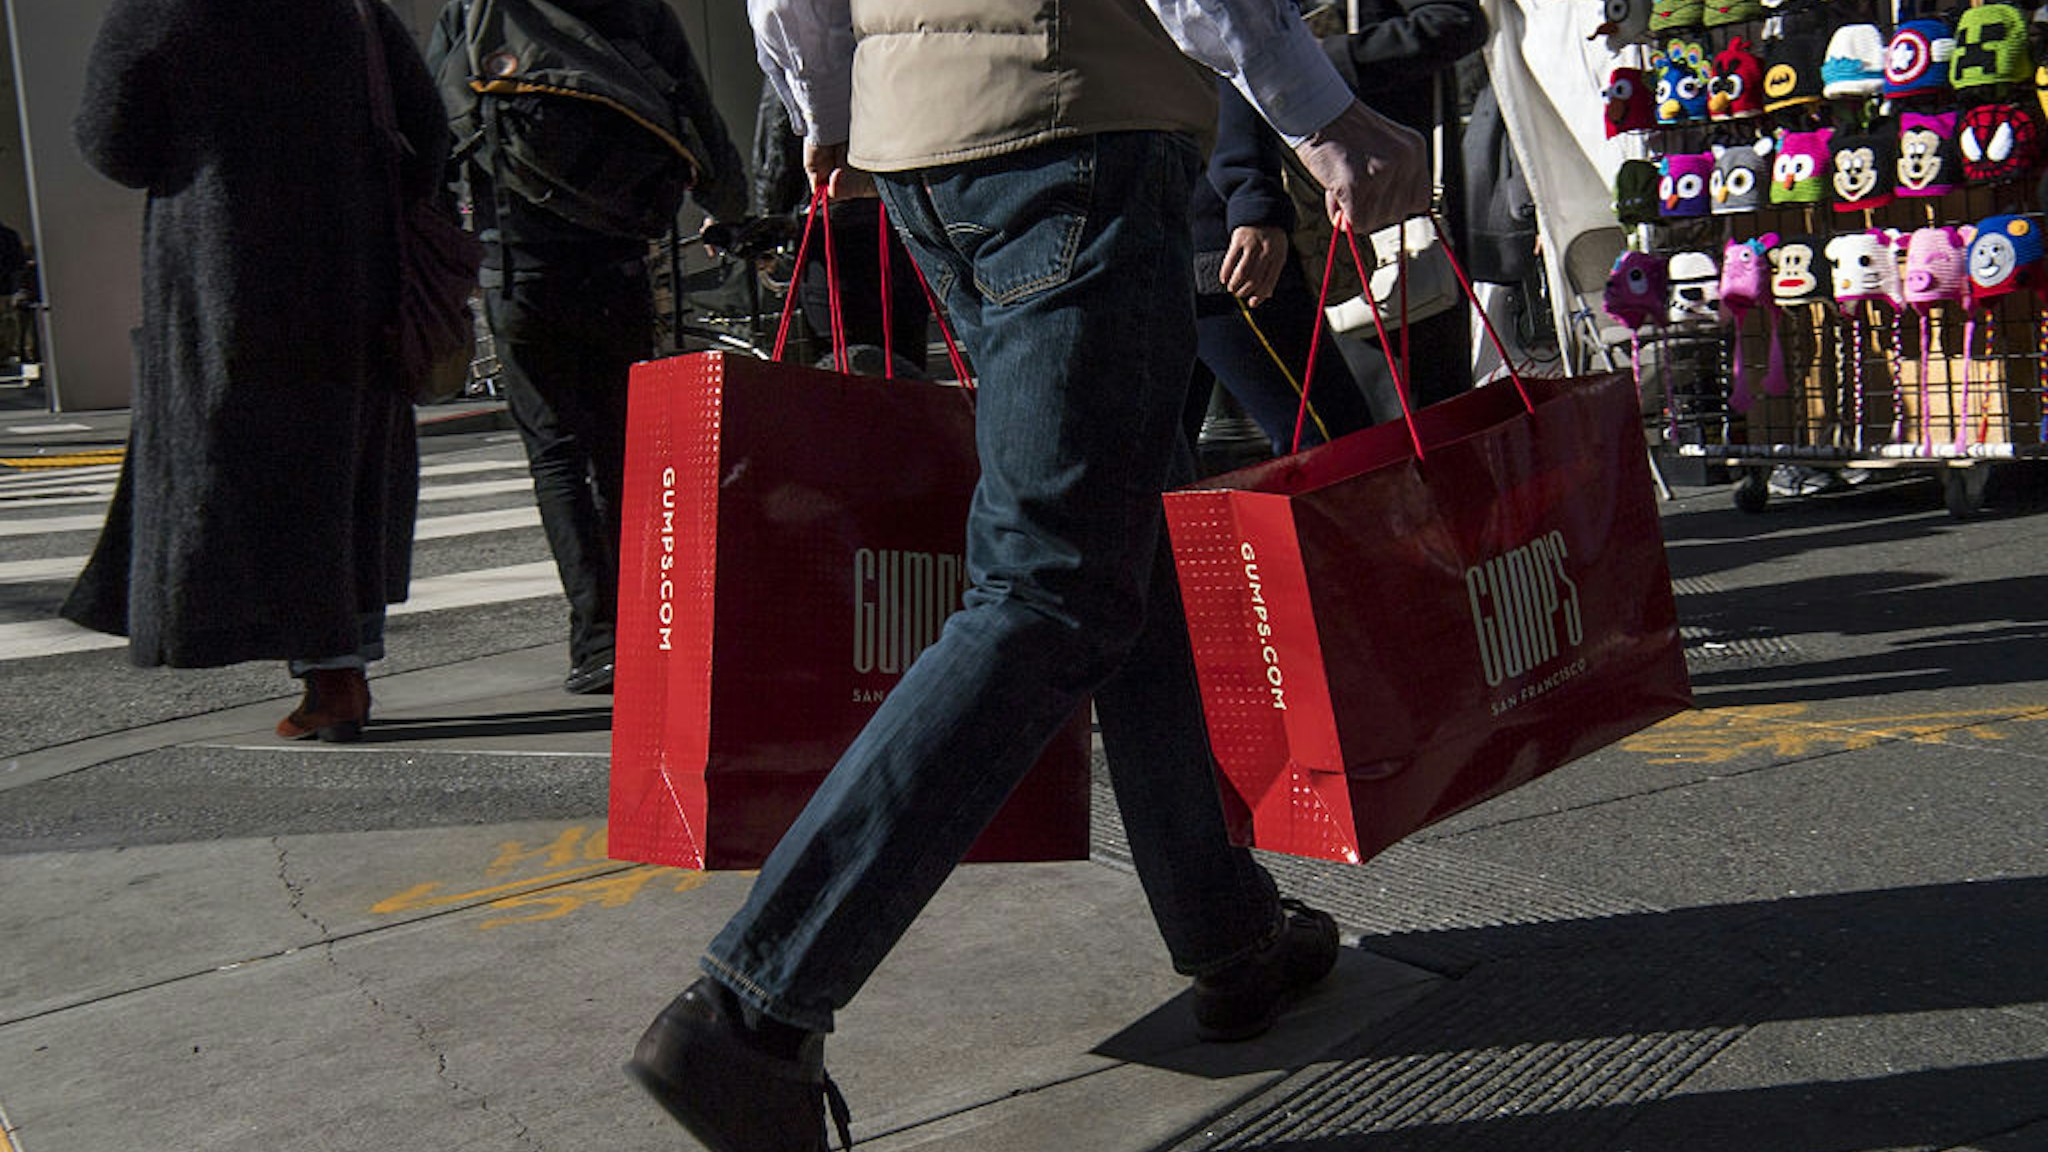 A shopper carries Gump's Corp. shopping bags in San Francisco, California, U.S., on Monday, Dec. 26, 2016. The Bloomberg Consumer Comfort Index, a survey which measures attitudes about the economy, is scheduled to be released on December 29. Photographer: David Paul Morris/Bloomberg via Getty Images